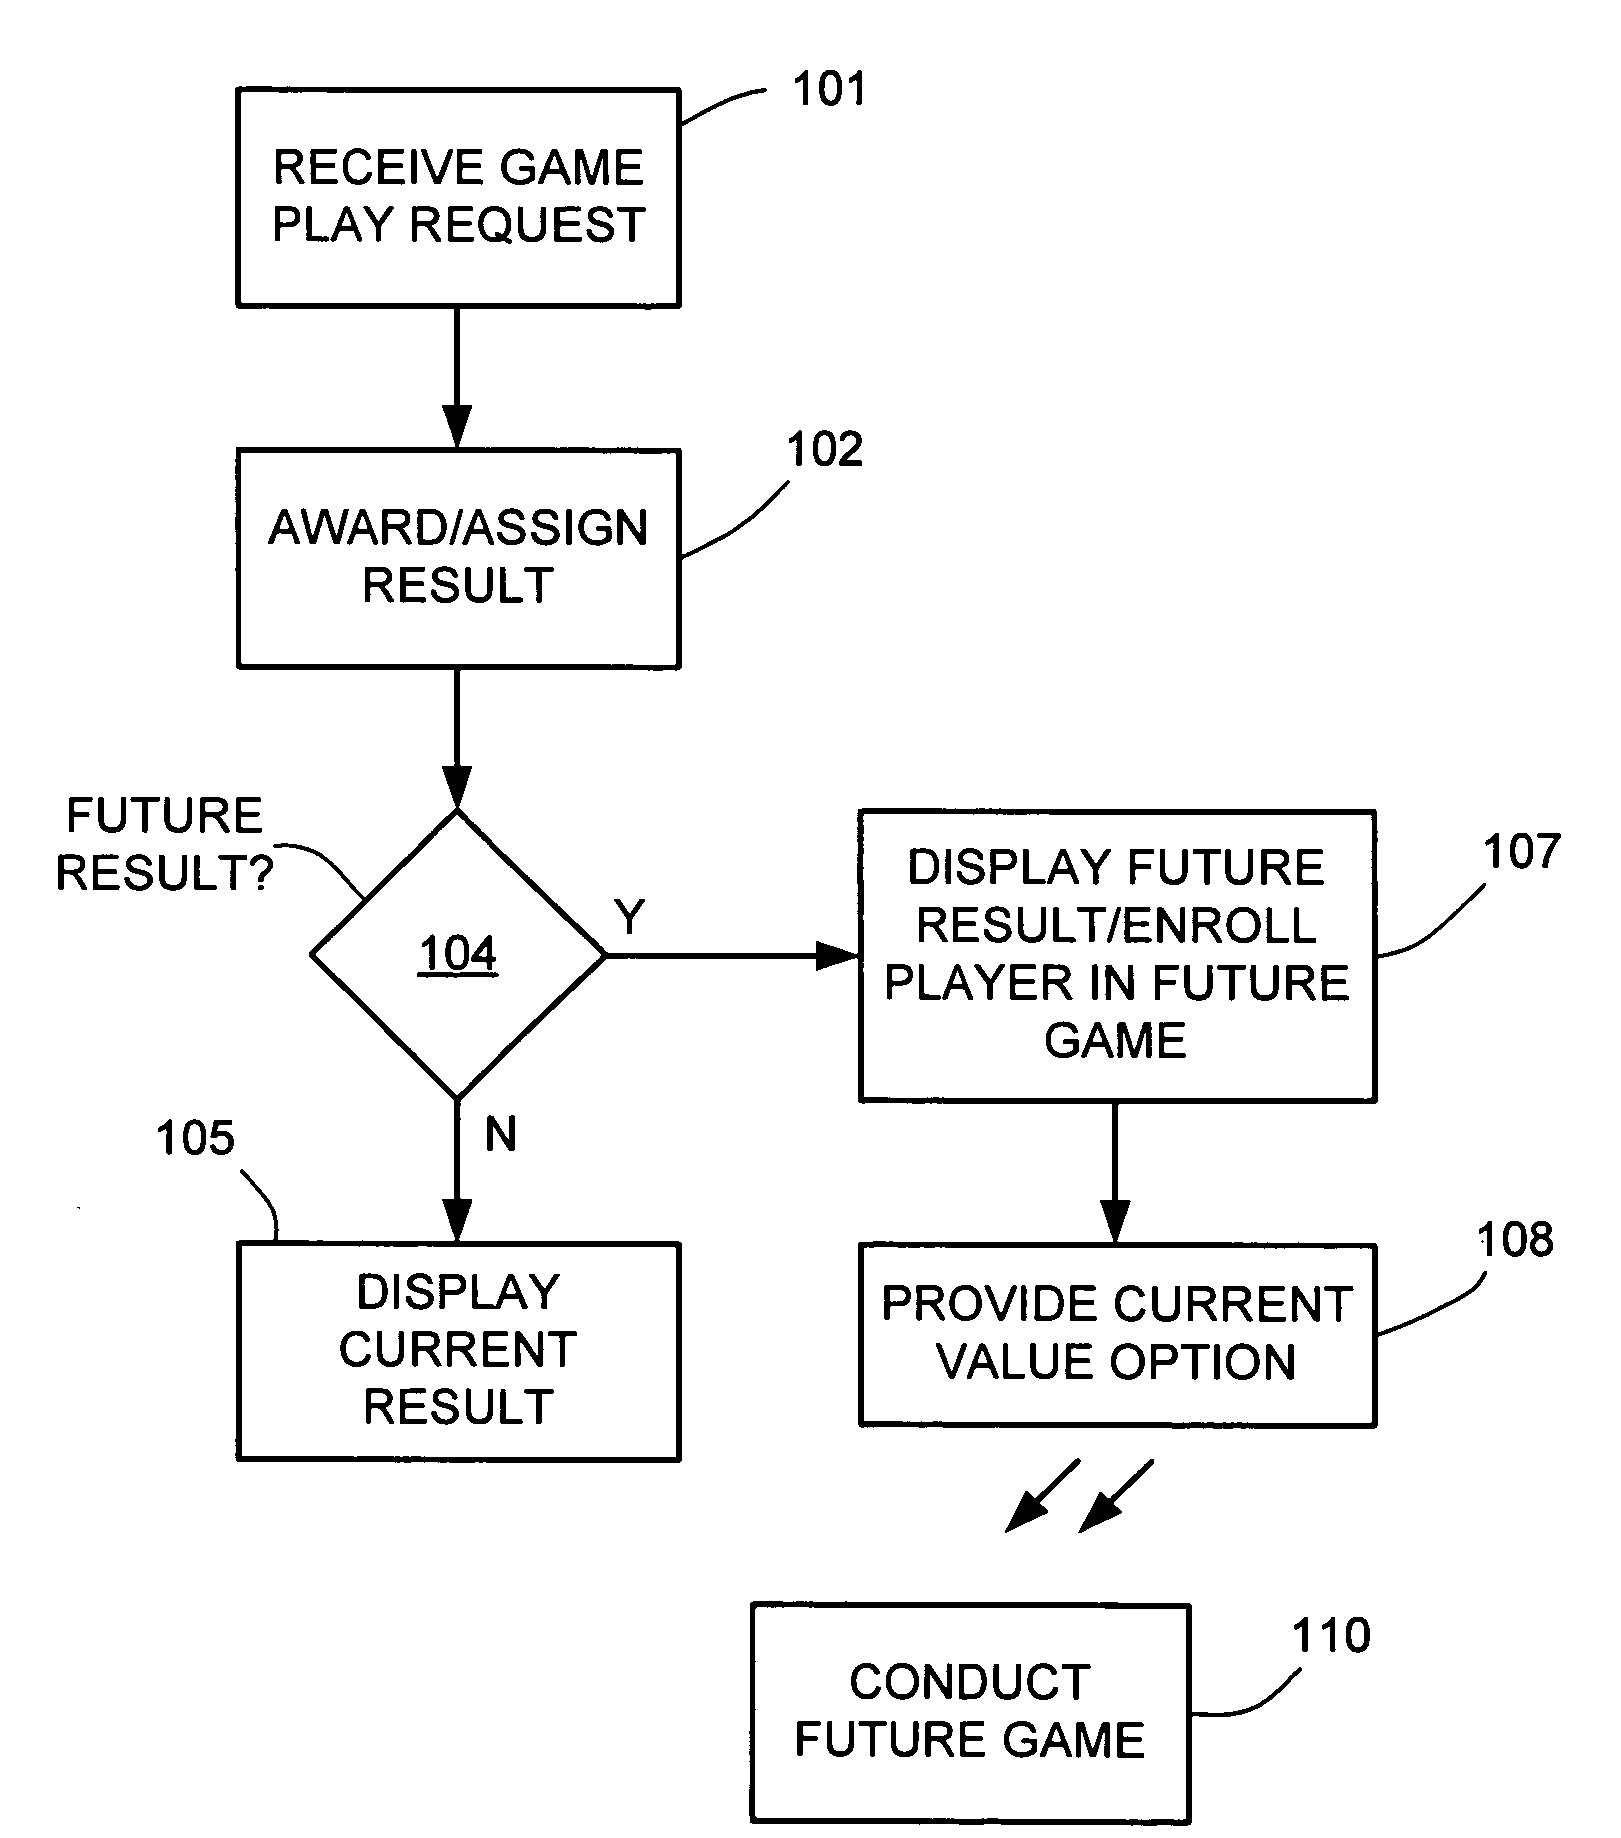 Arrangements for awarding future prizes in an electronic game system